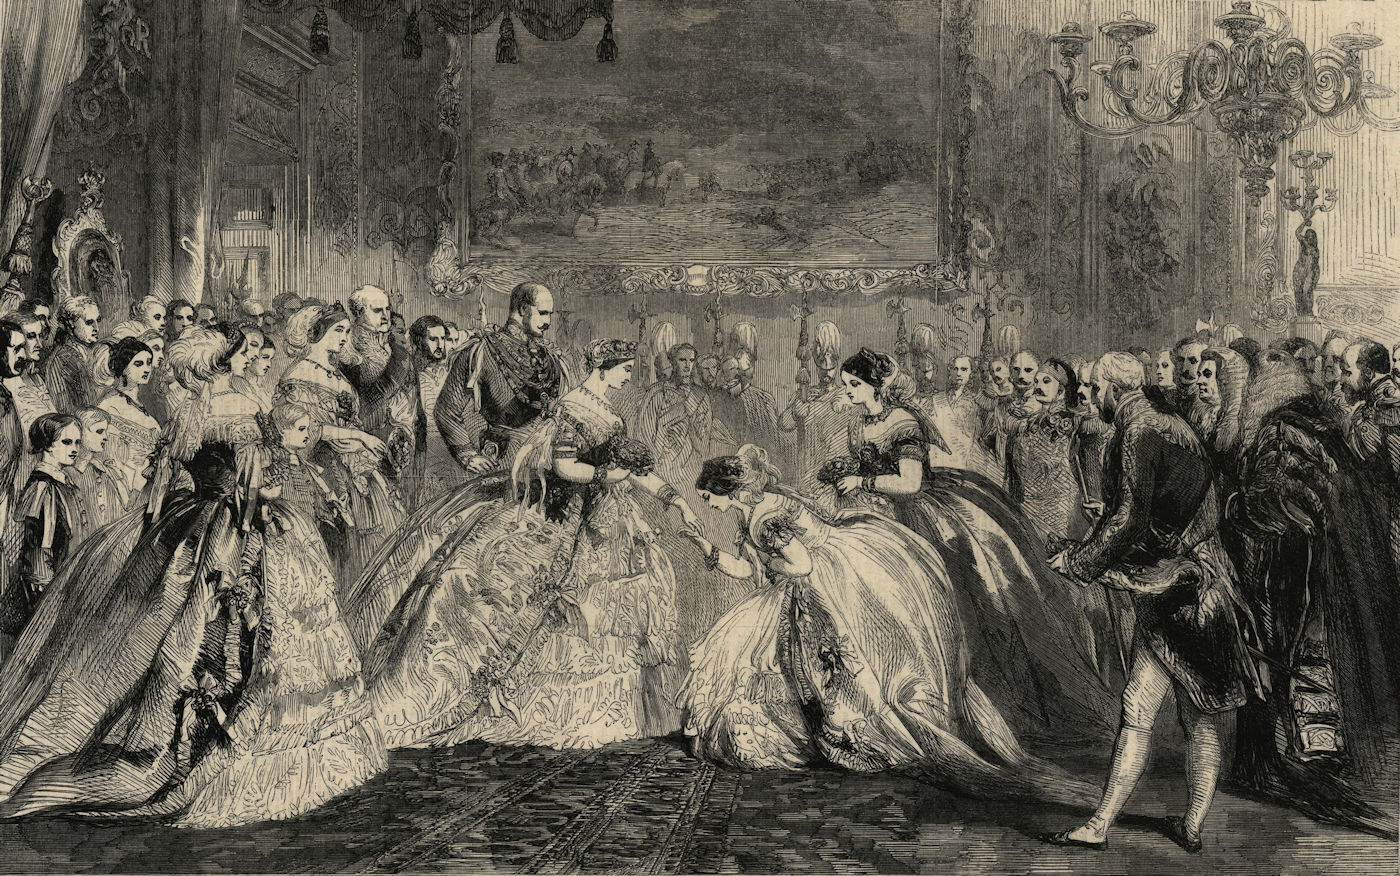 Queen Victoria's drawing room - ceremony of presentation. London. Royalty 1860